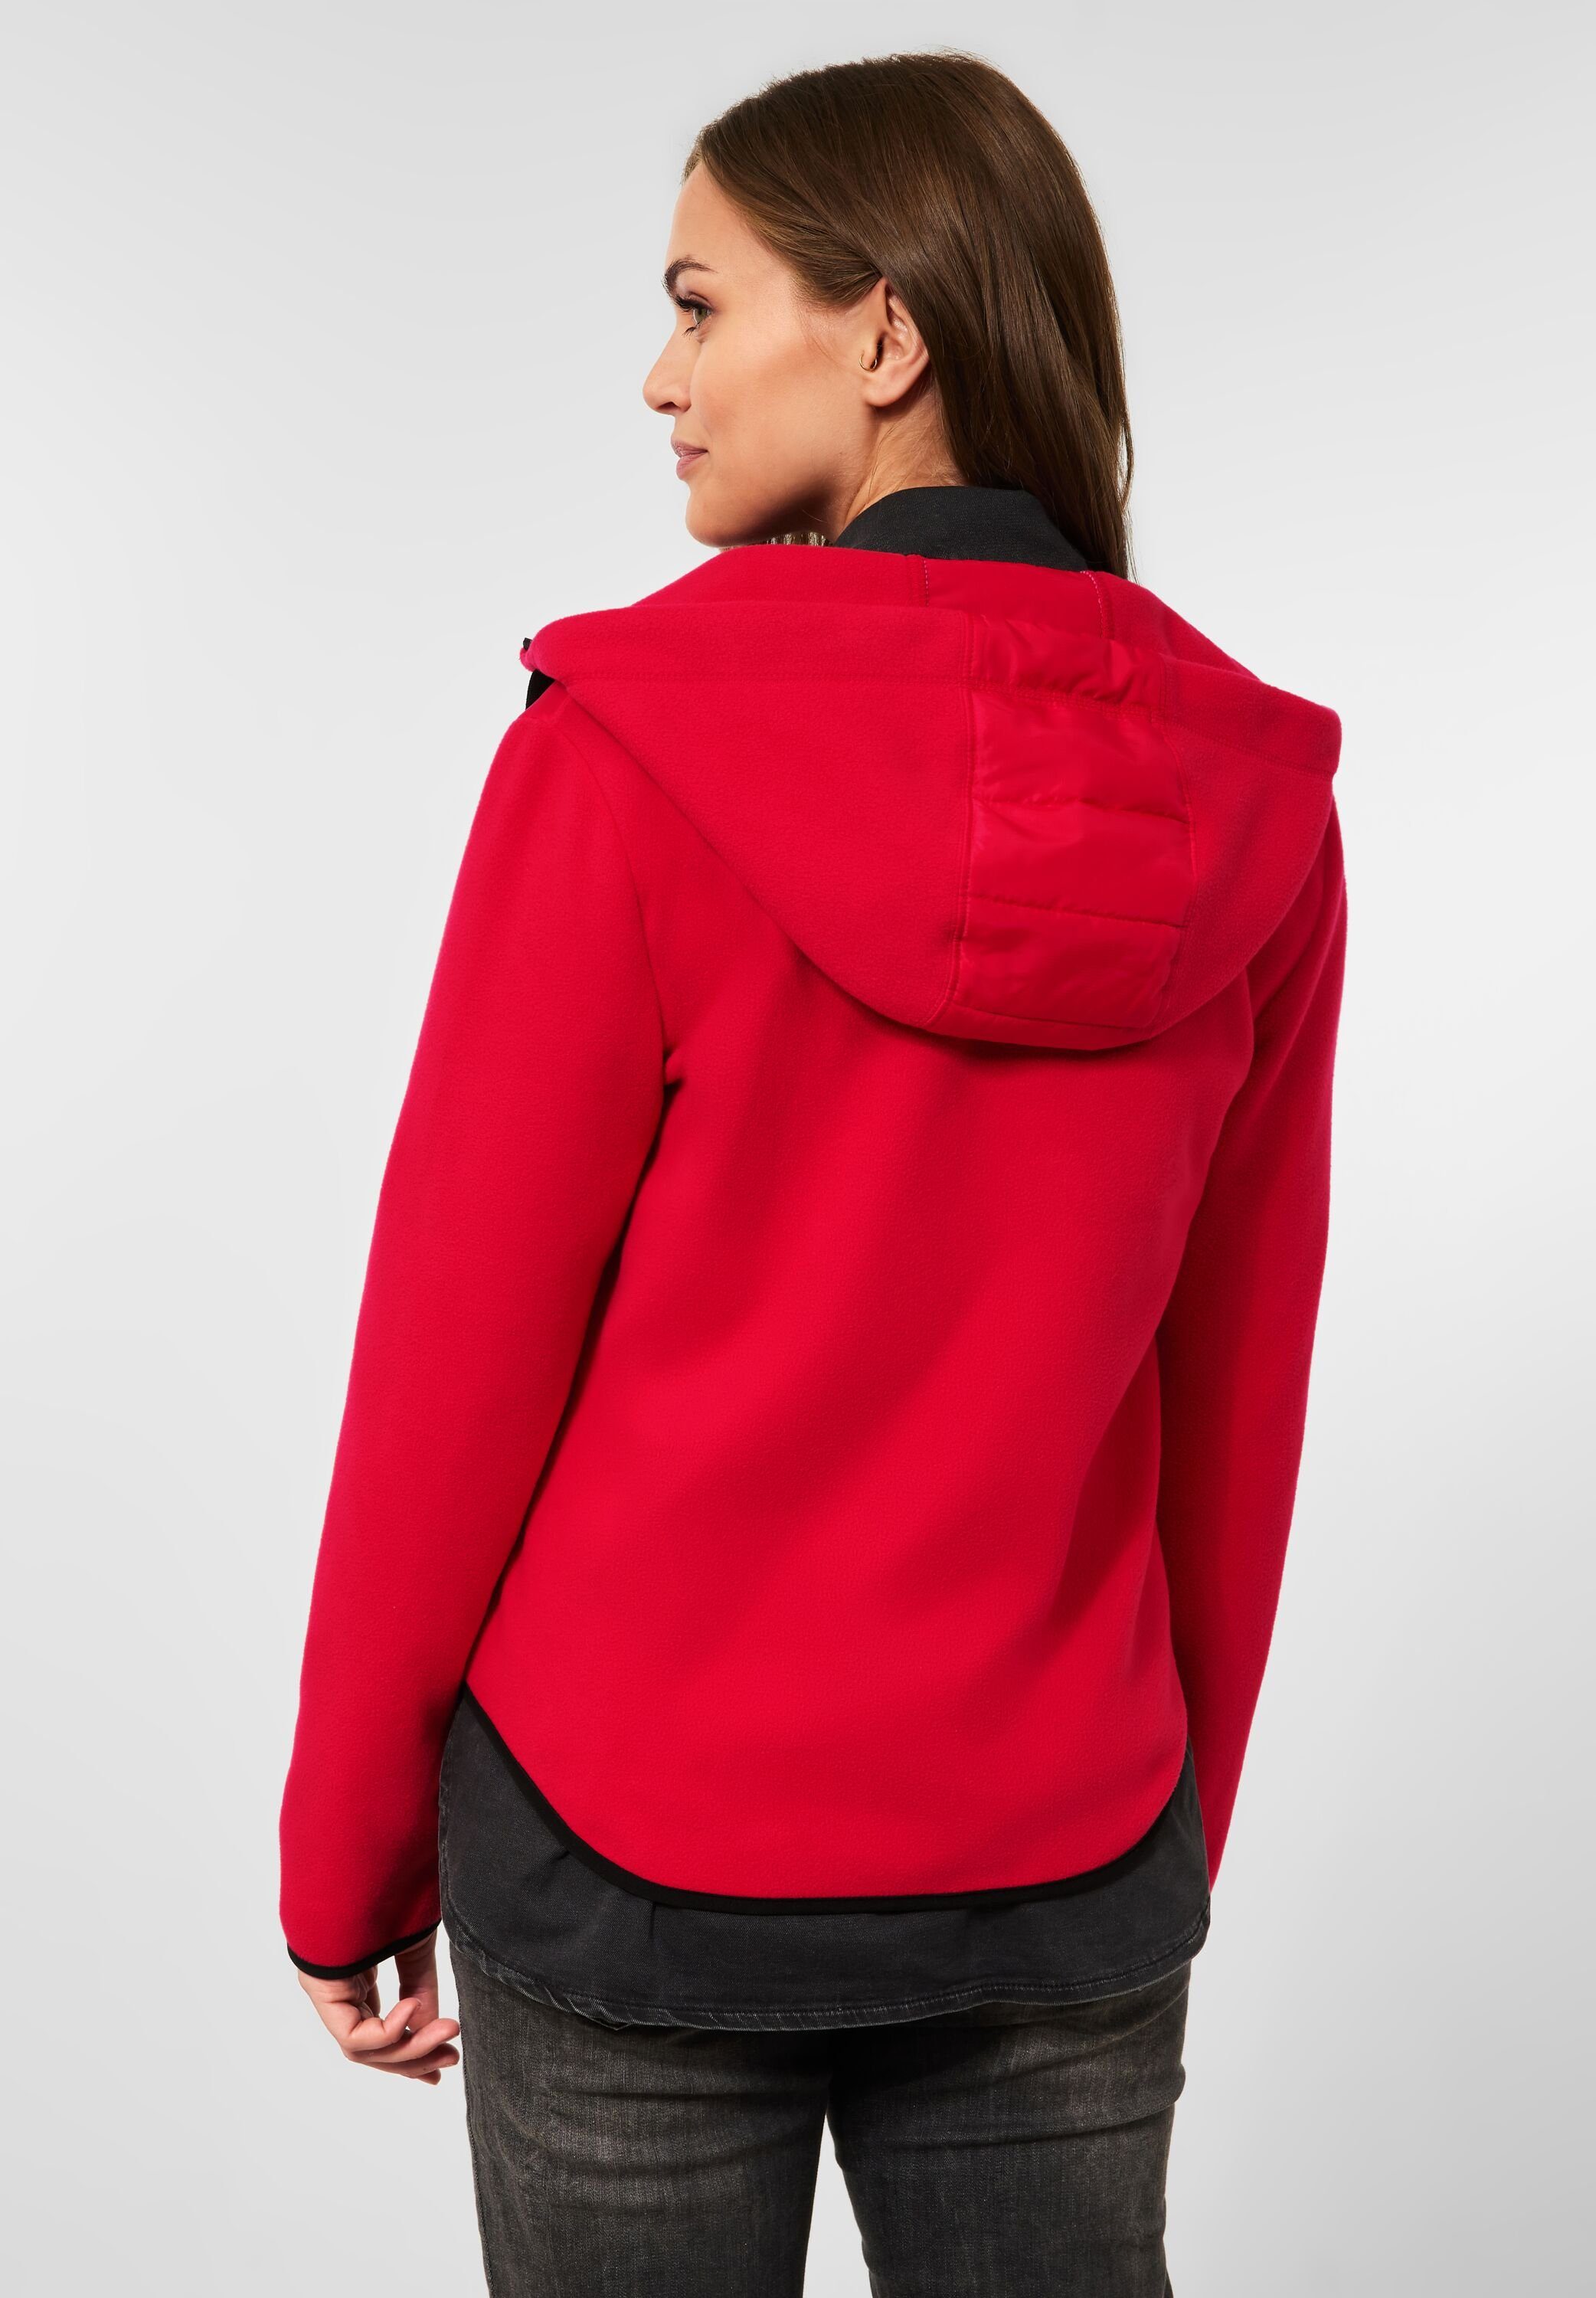 Red Strong Taschen Materialmix Fleecejacke in Sweatjacke Cecil im Cecil (1-tlg)